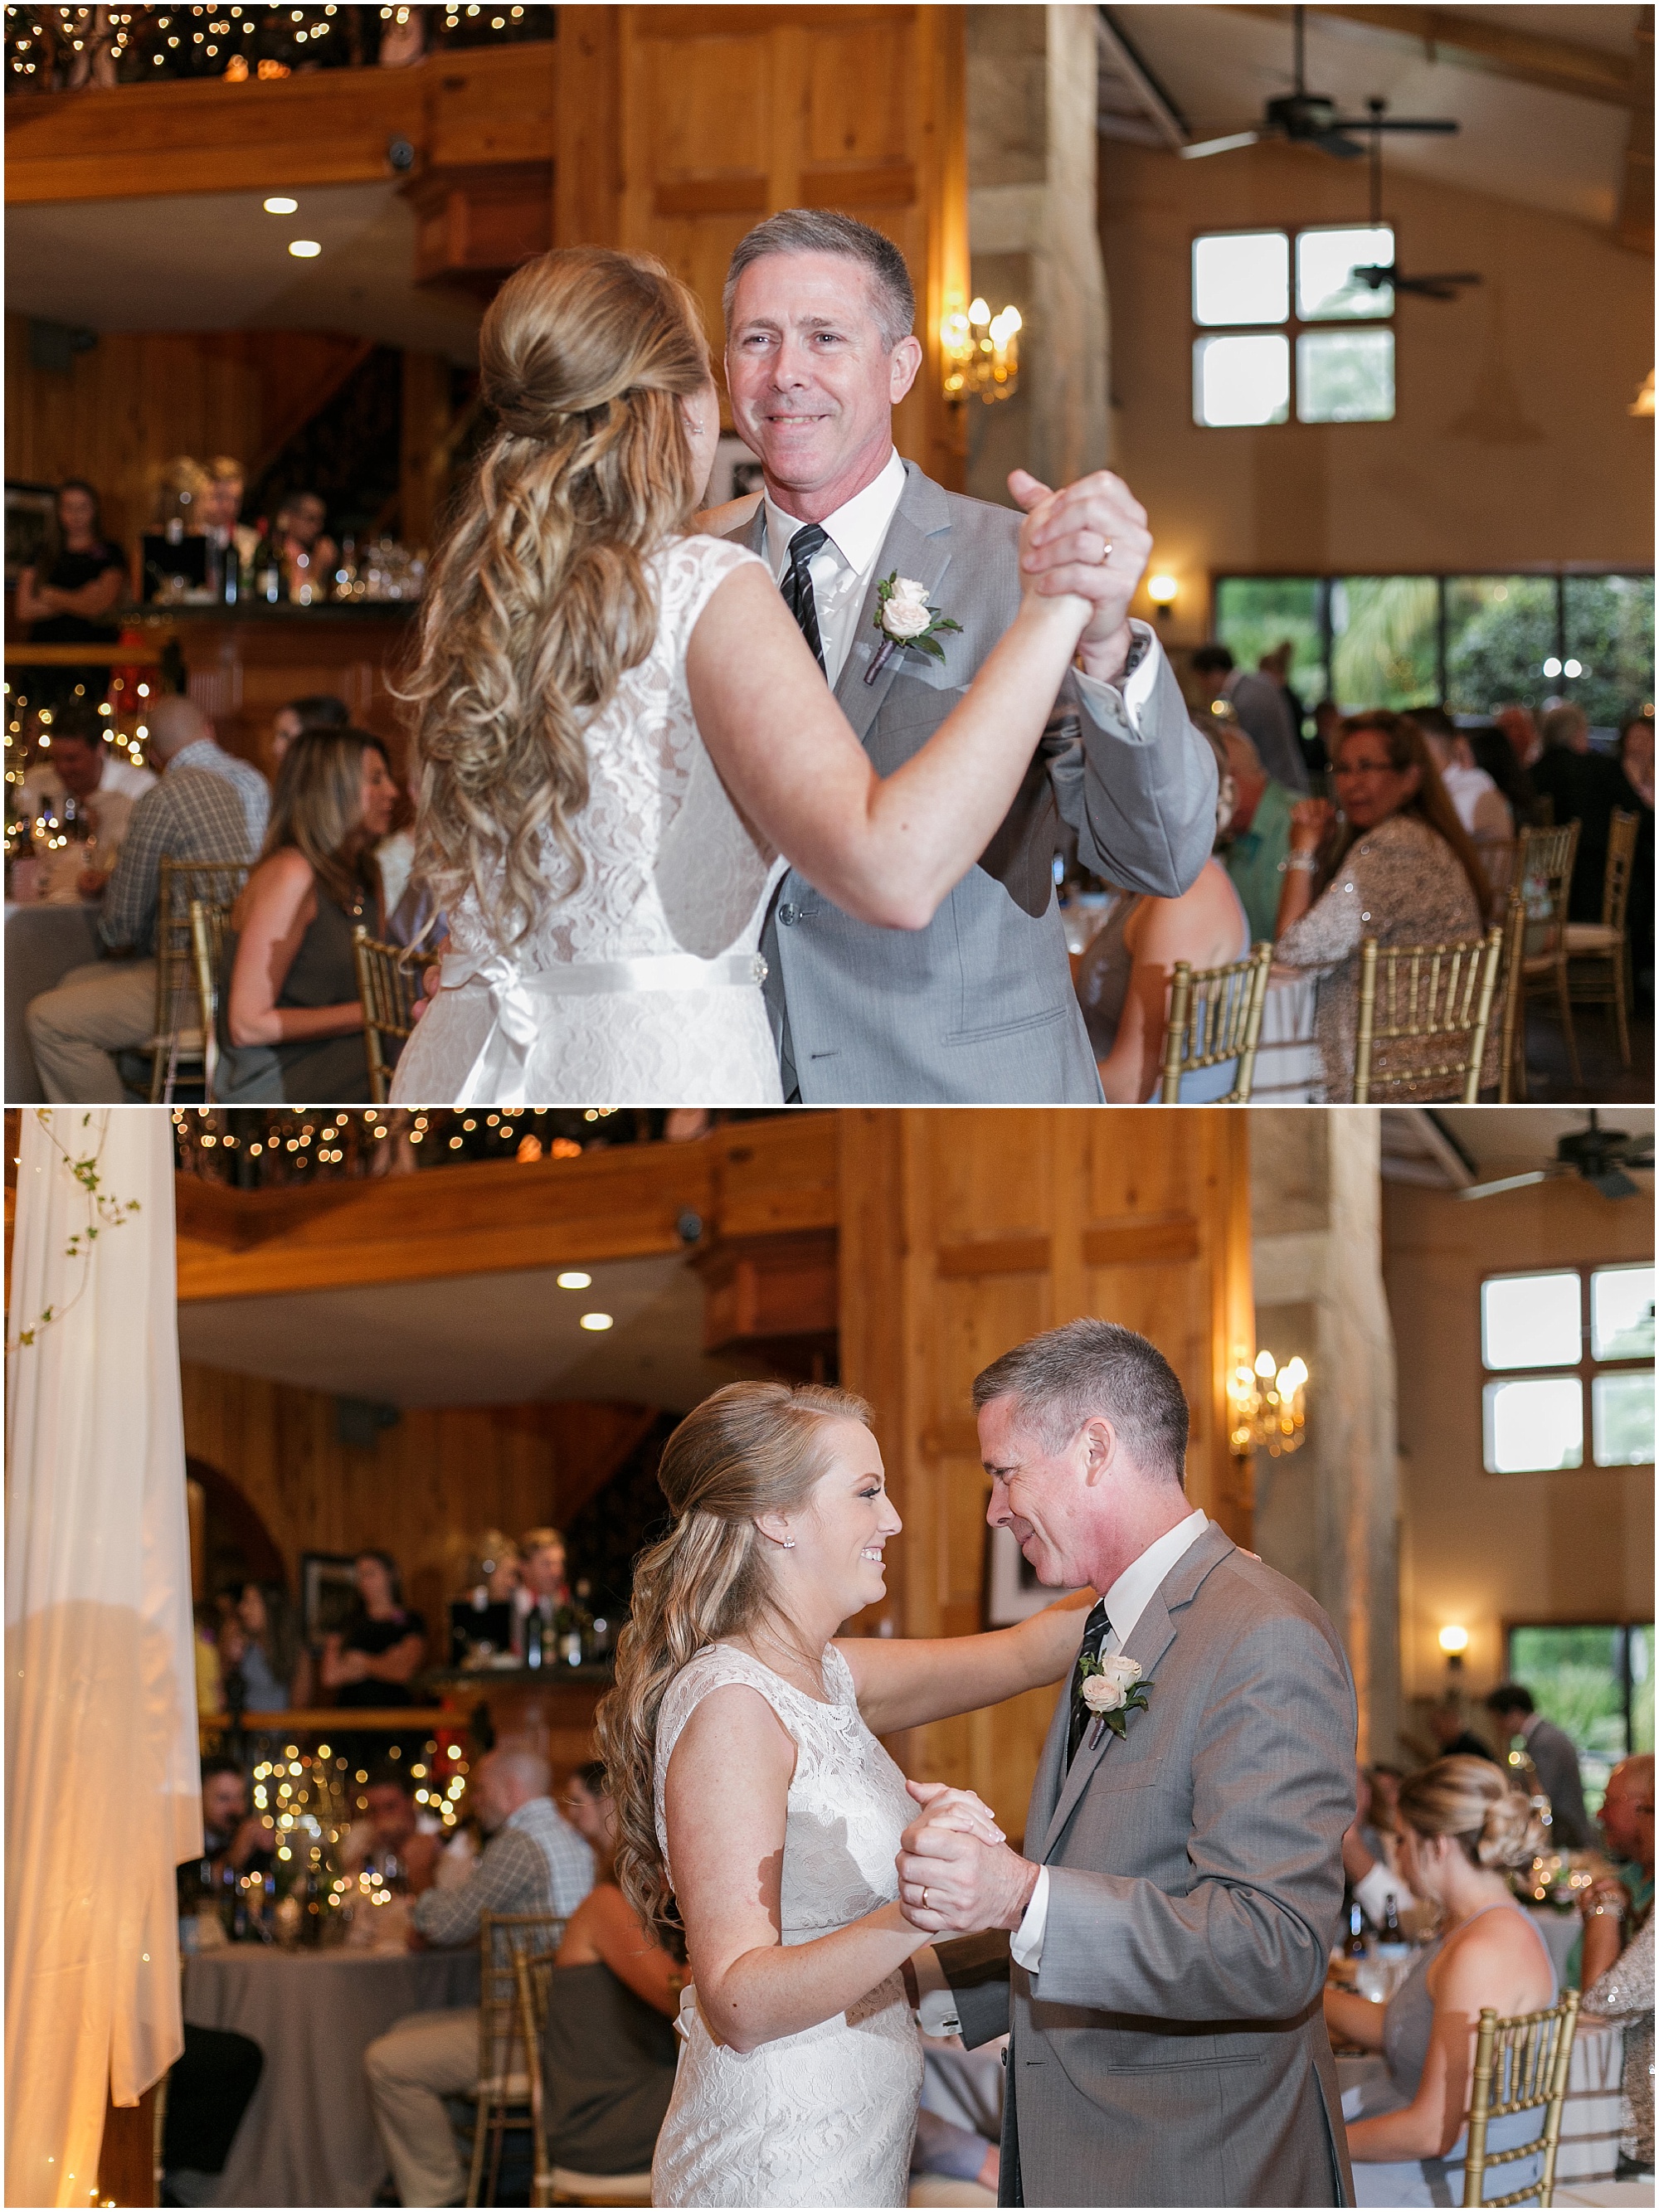 Bride dances with her father at her wedding.